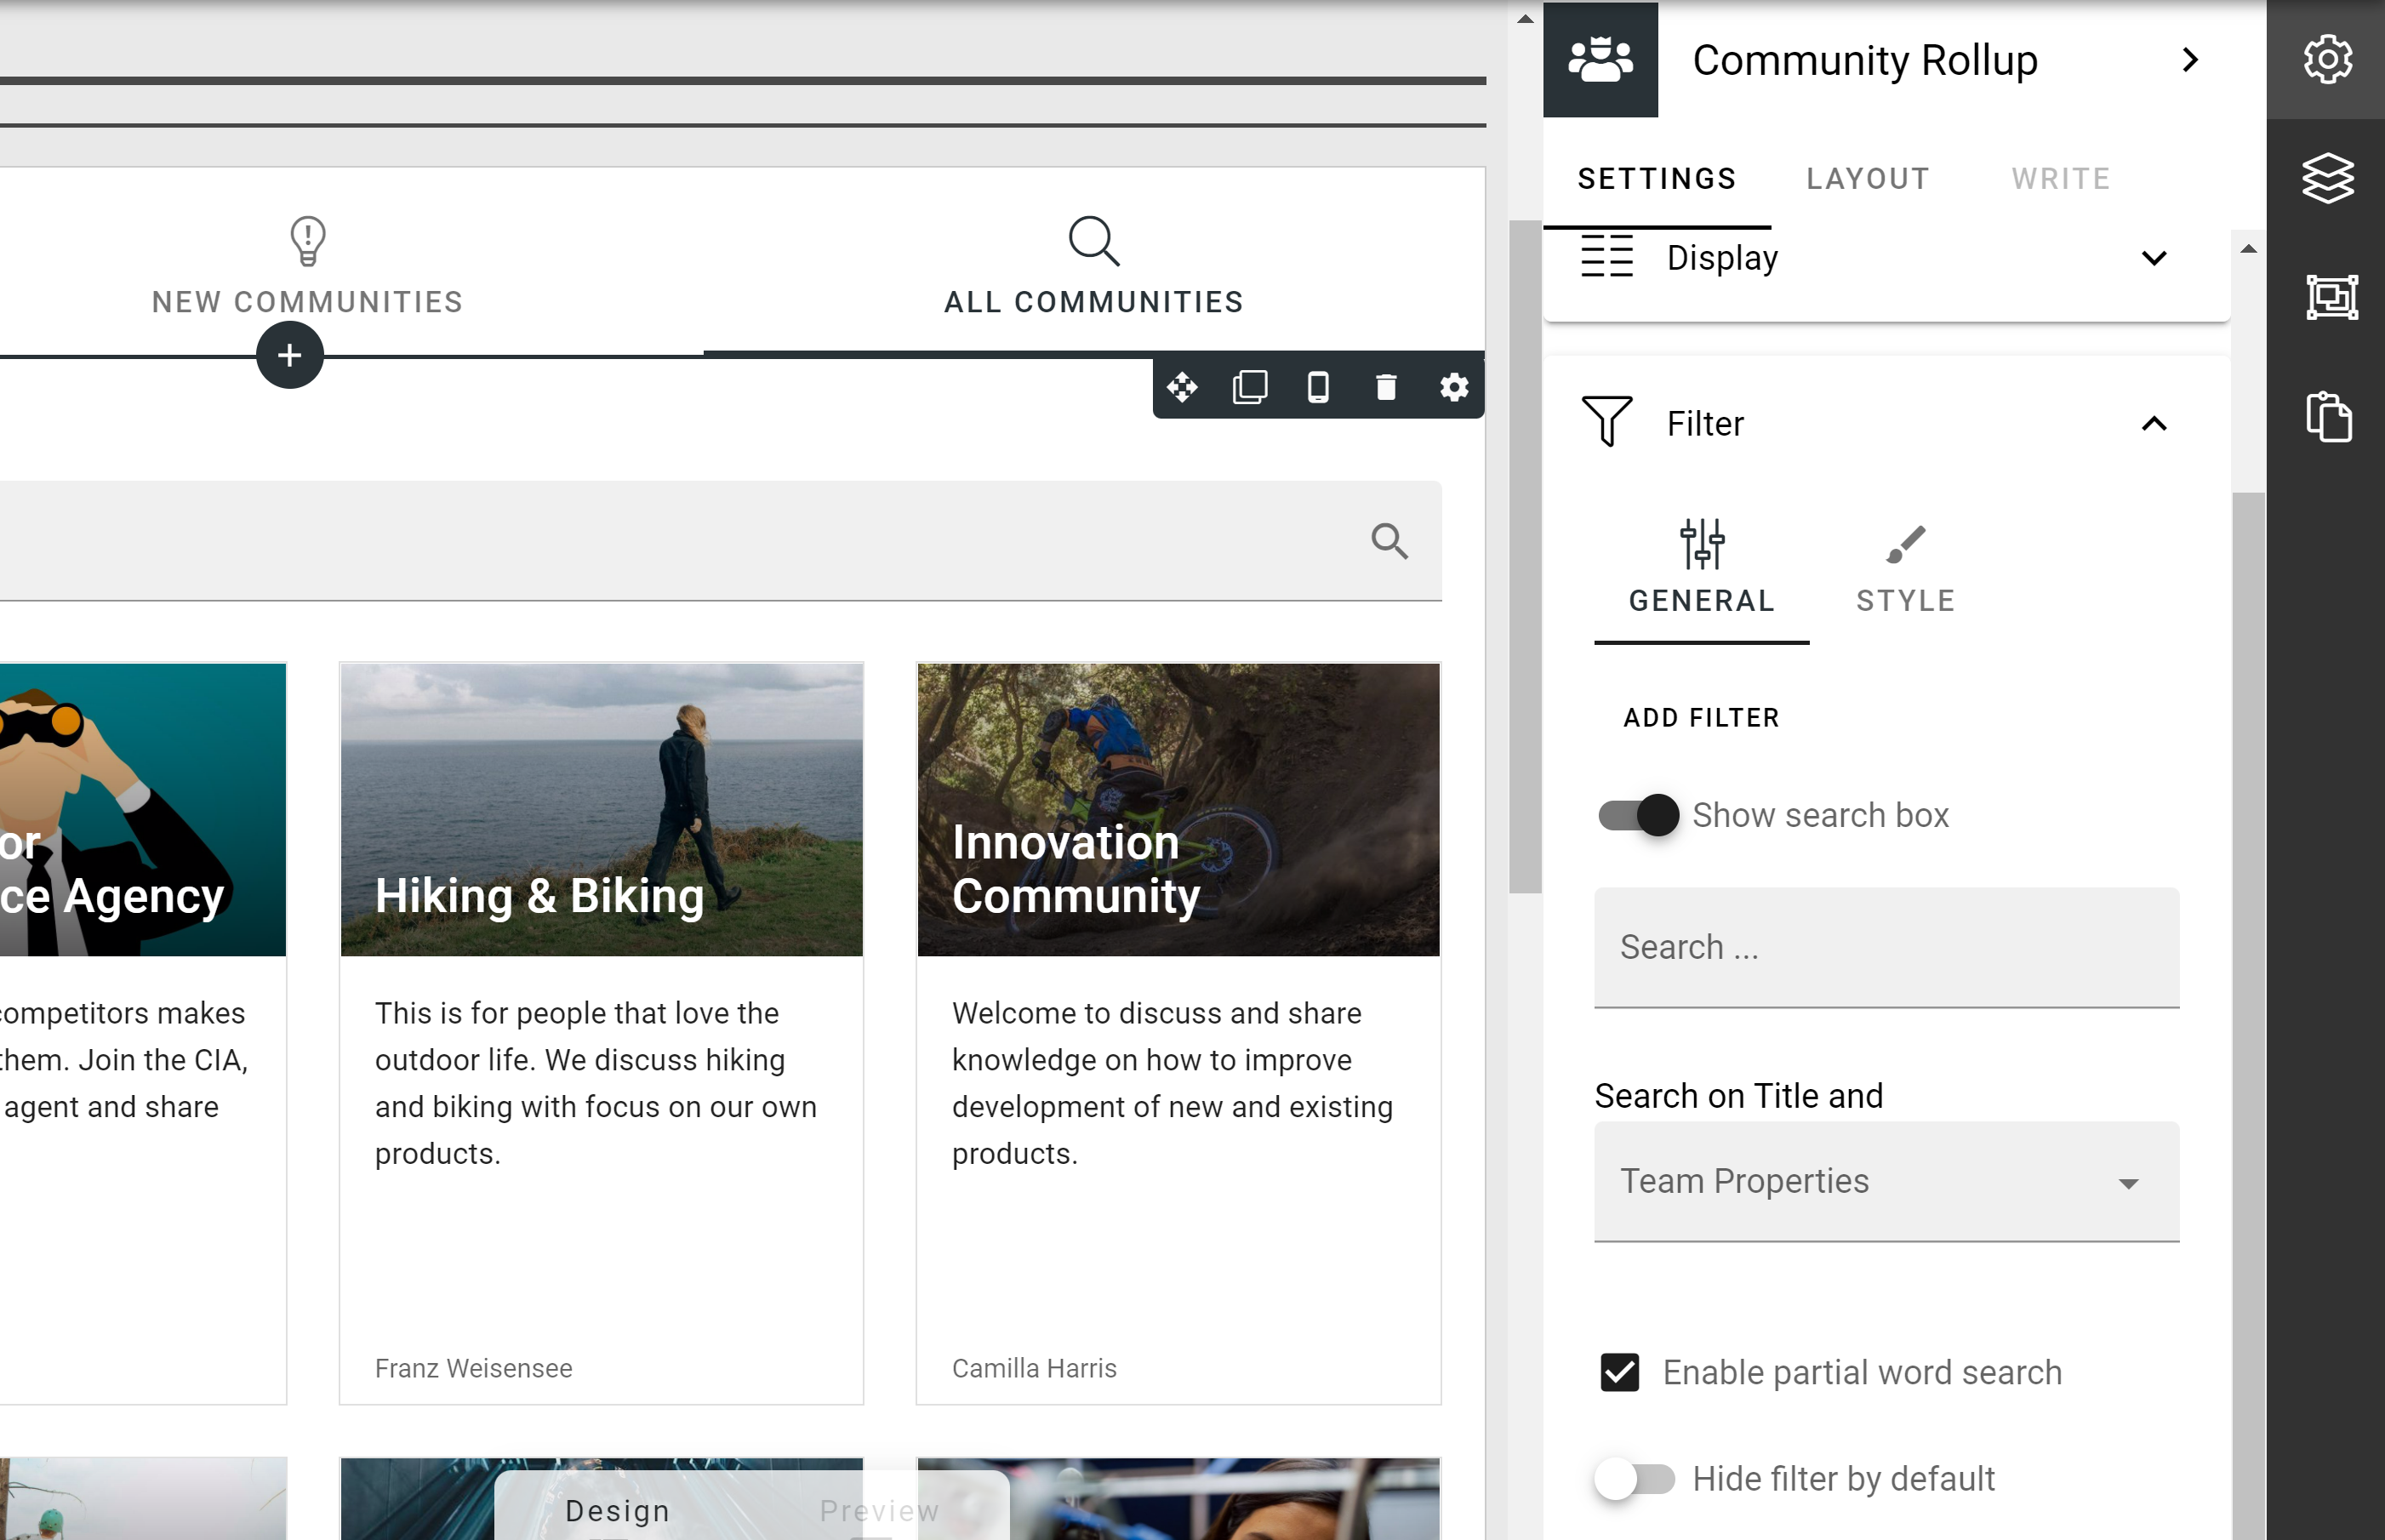 ../../_images/communityportal-layout-searchboxfilter.png